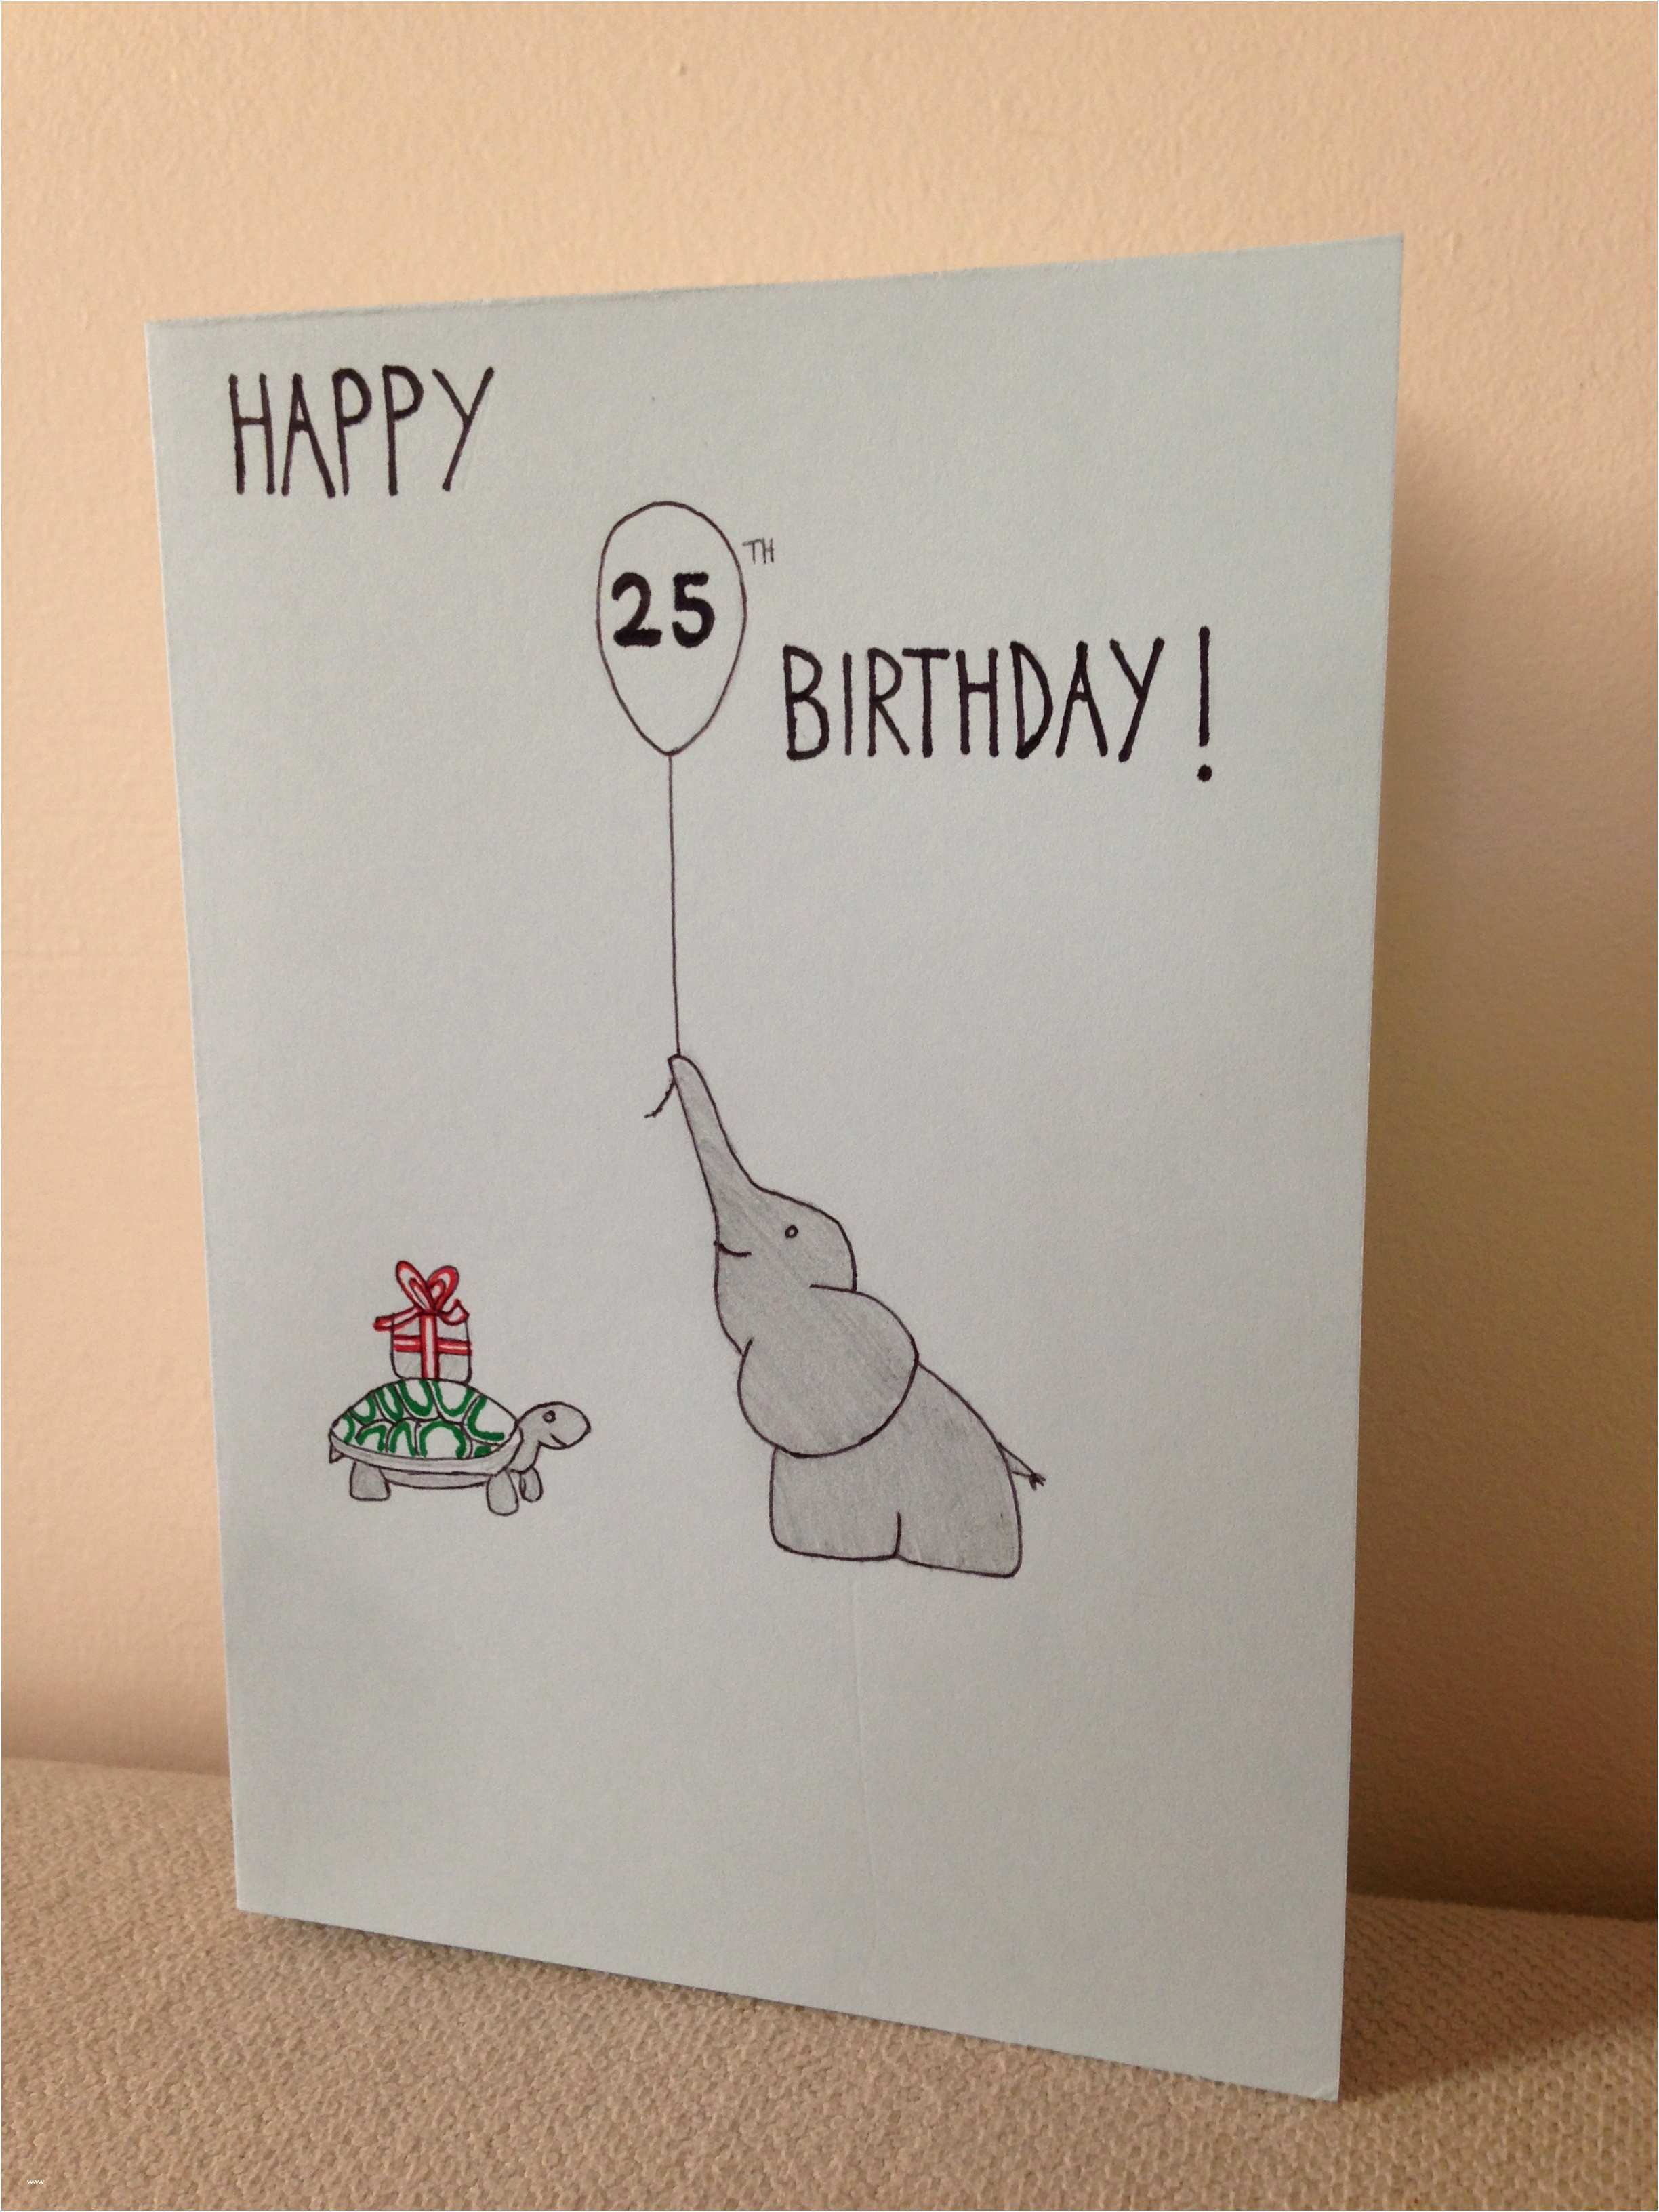 Funny Birthday Cards Ideas Collection Of Birthday Cards Ideas Drawing Download More Than 30